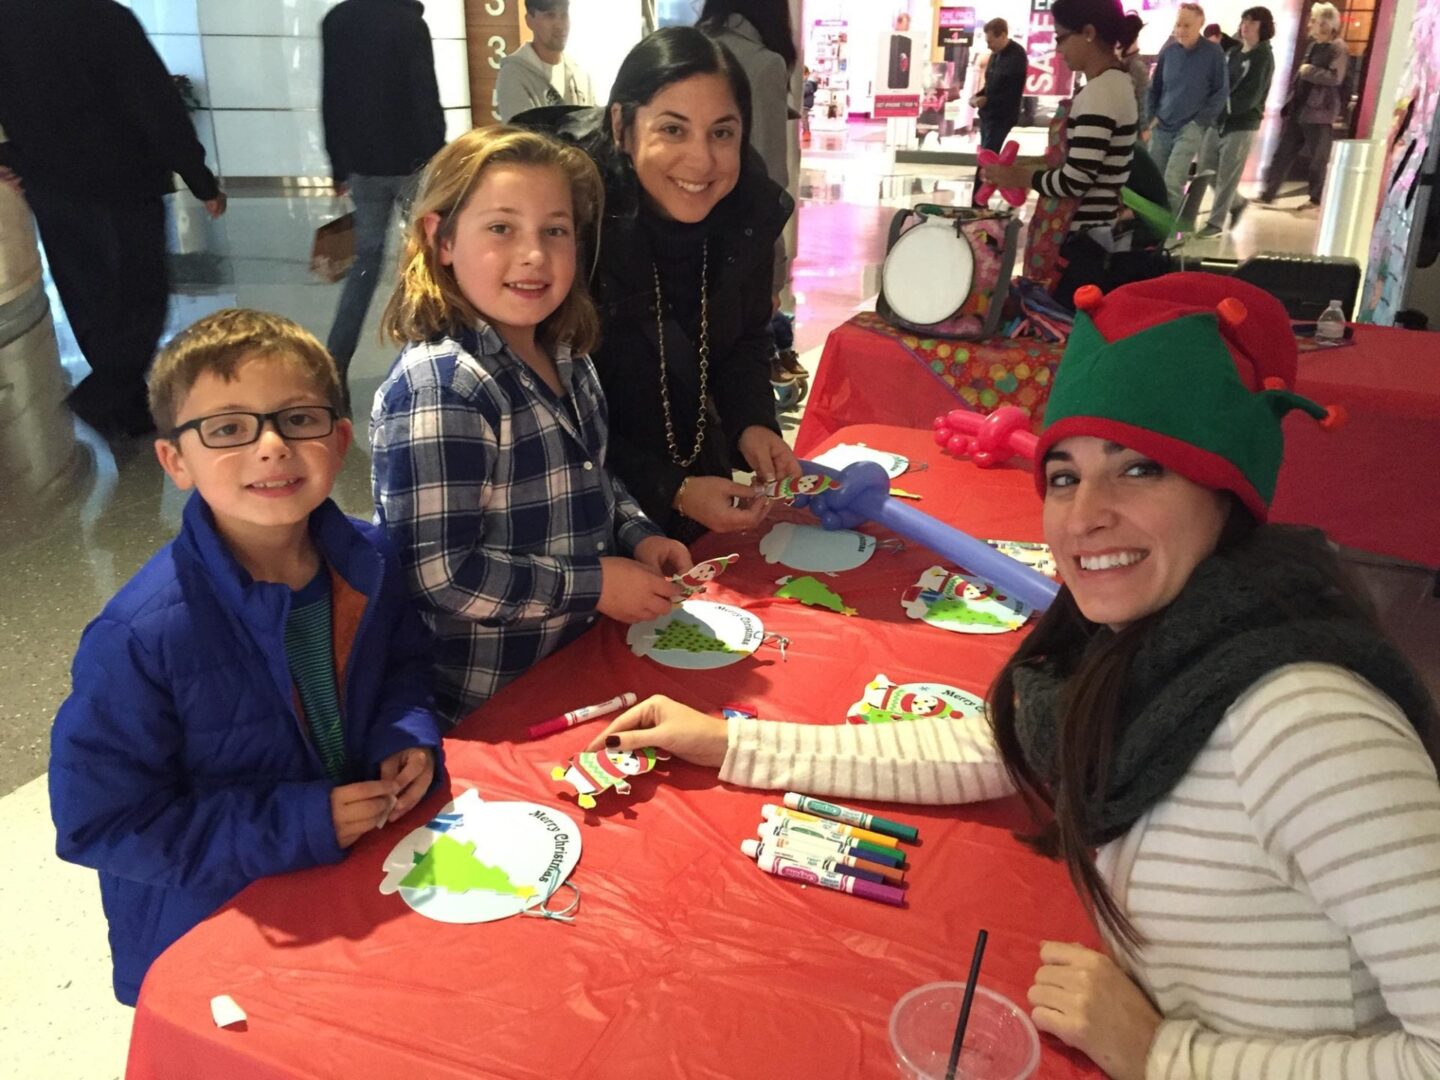 two adults and two kids at a craft table